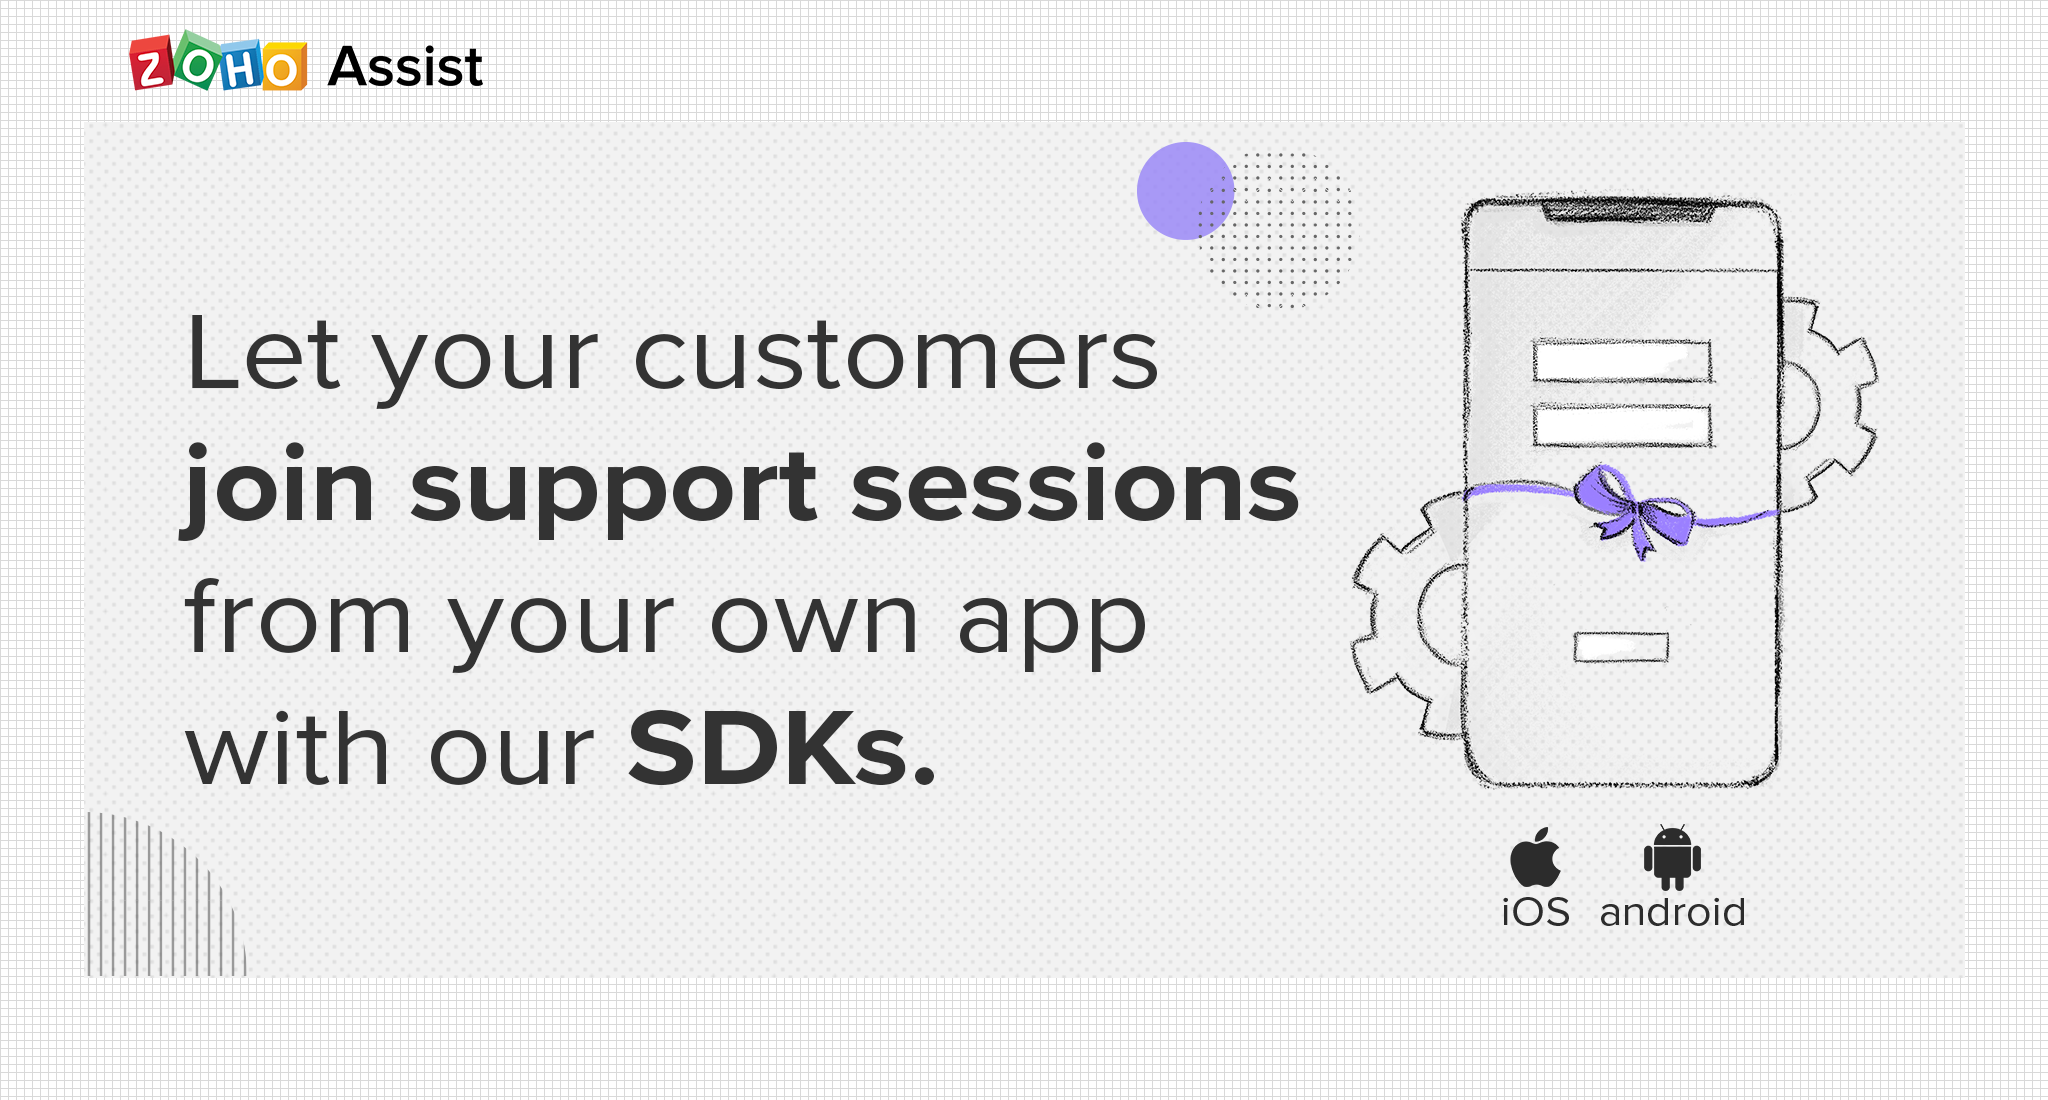 Supporting mobile devices is an easier job now with our mobile SDK for iOS and Android.